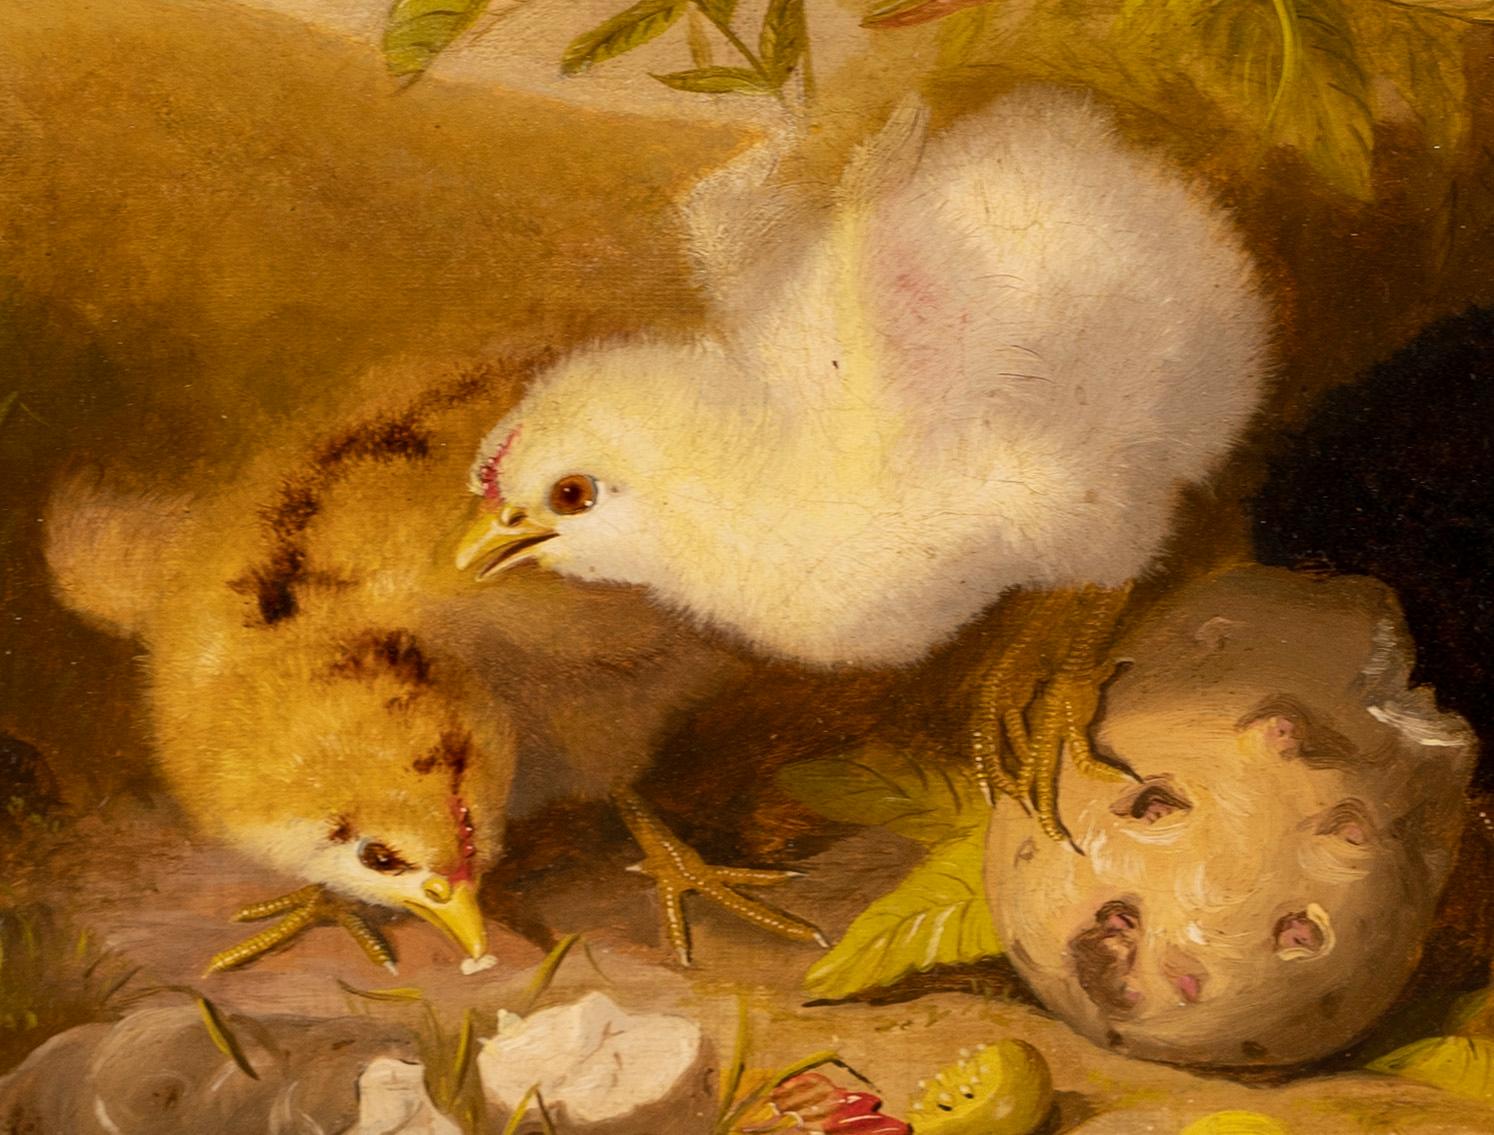 Antique American painting of chicks by Mary Russell Smith (1842 - 1878).  Oil on canvas, circa 1860.  Signed.  Image size 14L x 20H.  Housed in a giltwood frame.